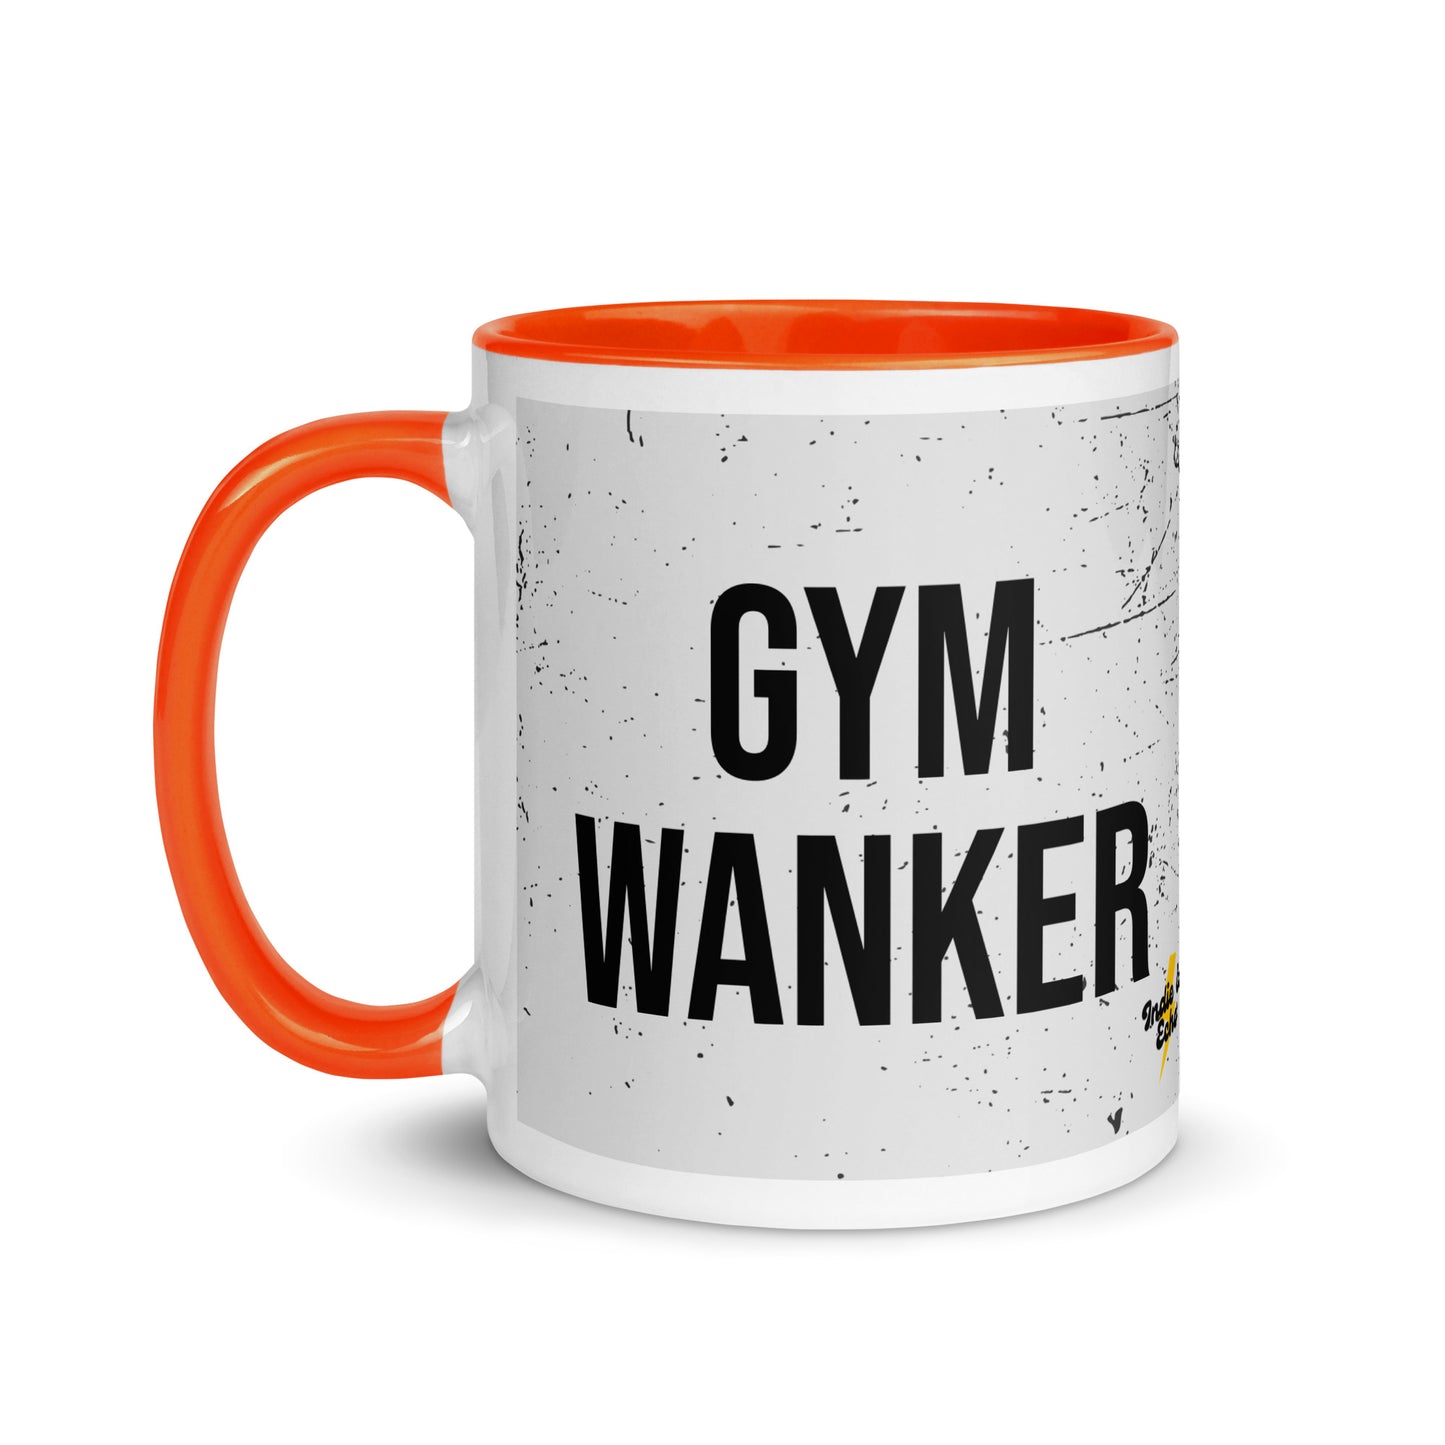 Orange handled mug with gym wanker written on it, across a grey splatter background. A gift for someone who loves the gym.